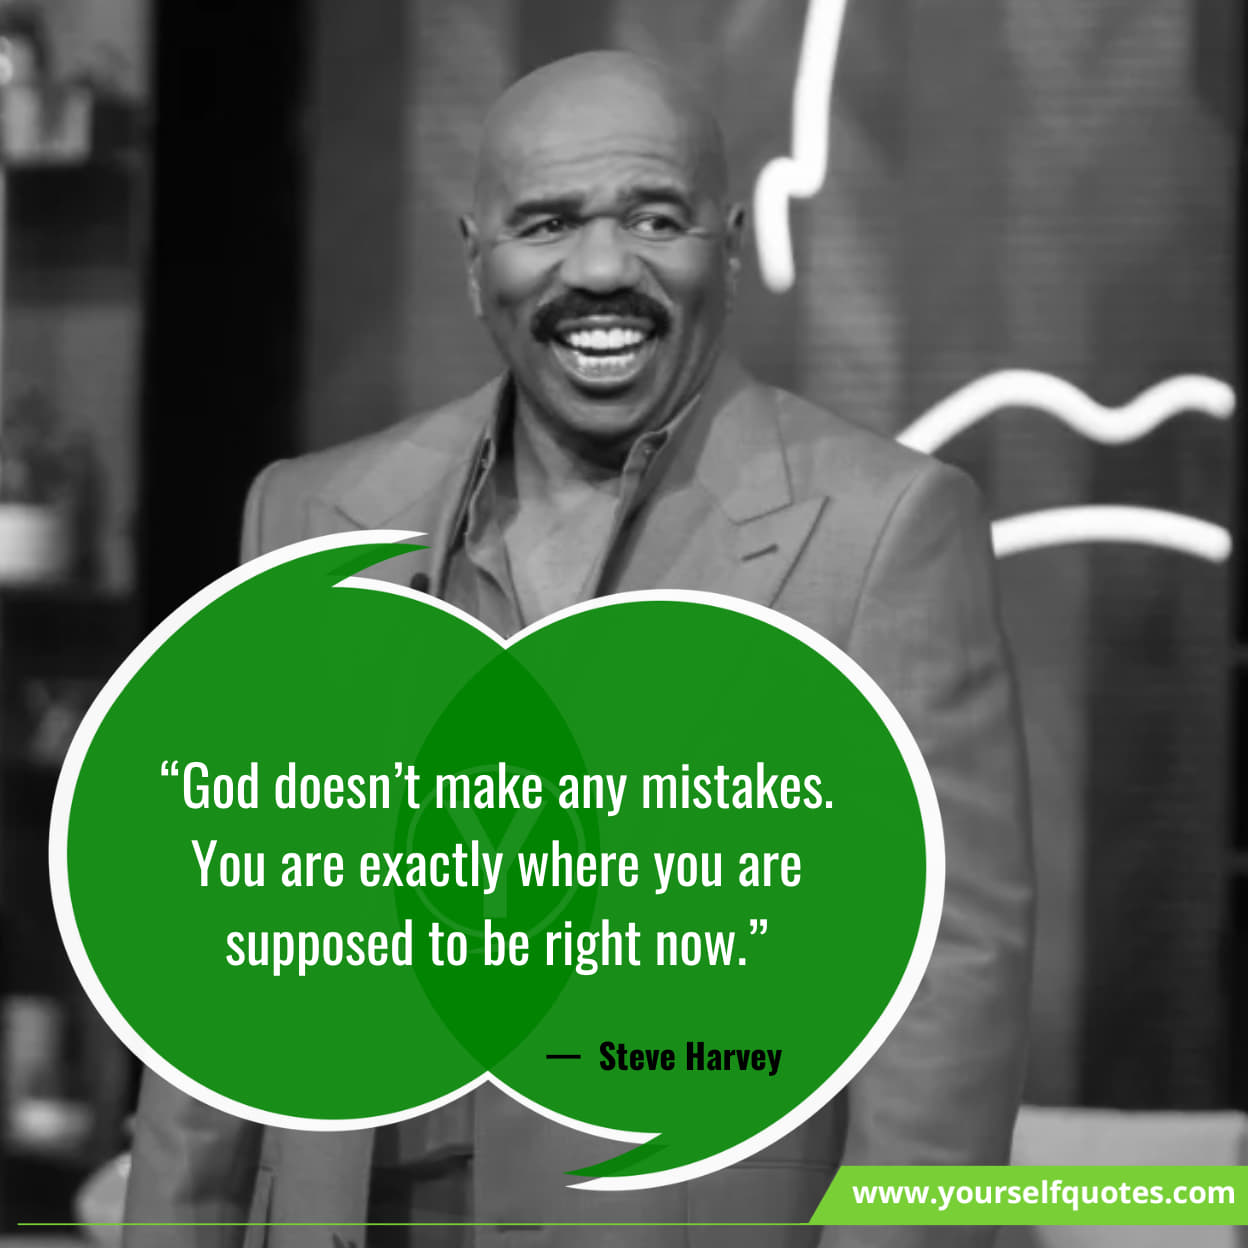 Steve Harvey Quotes On Helping Others